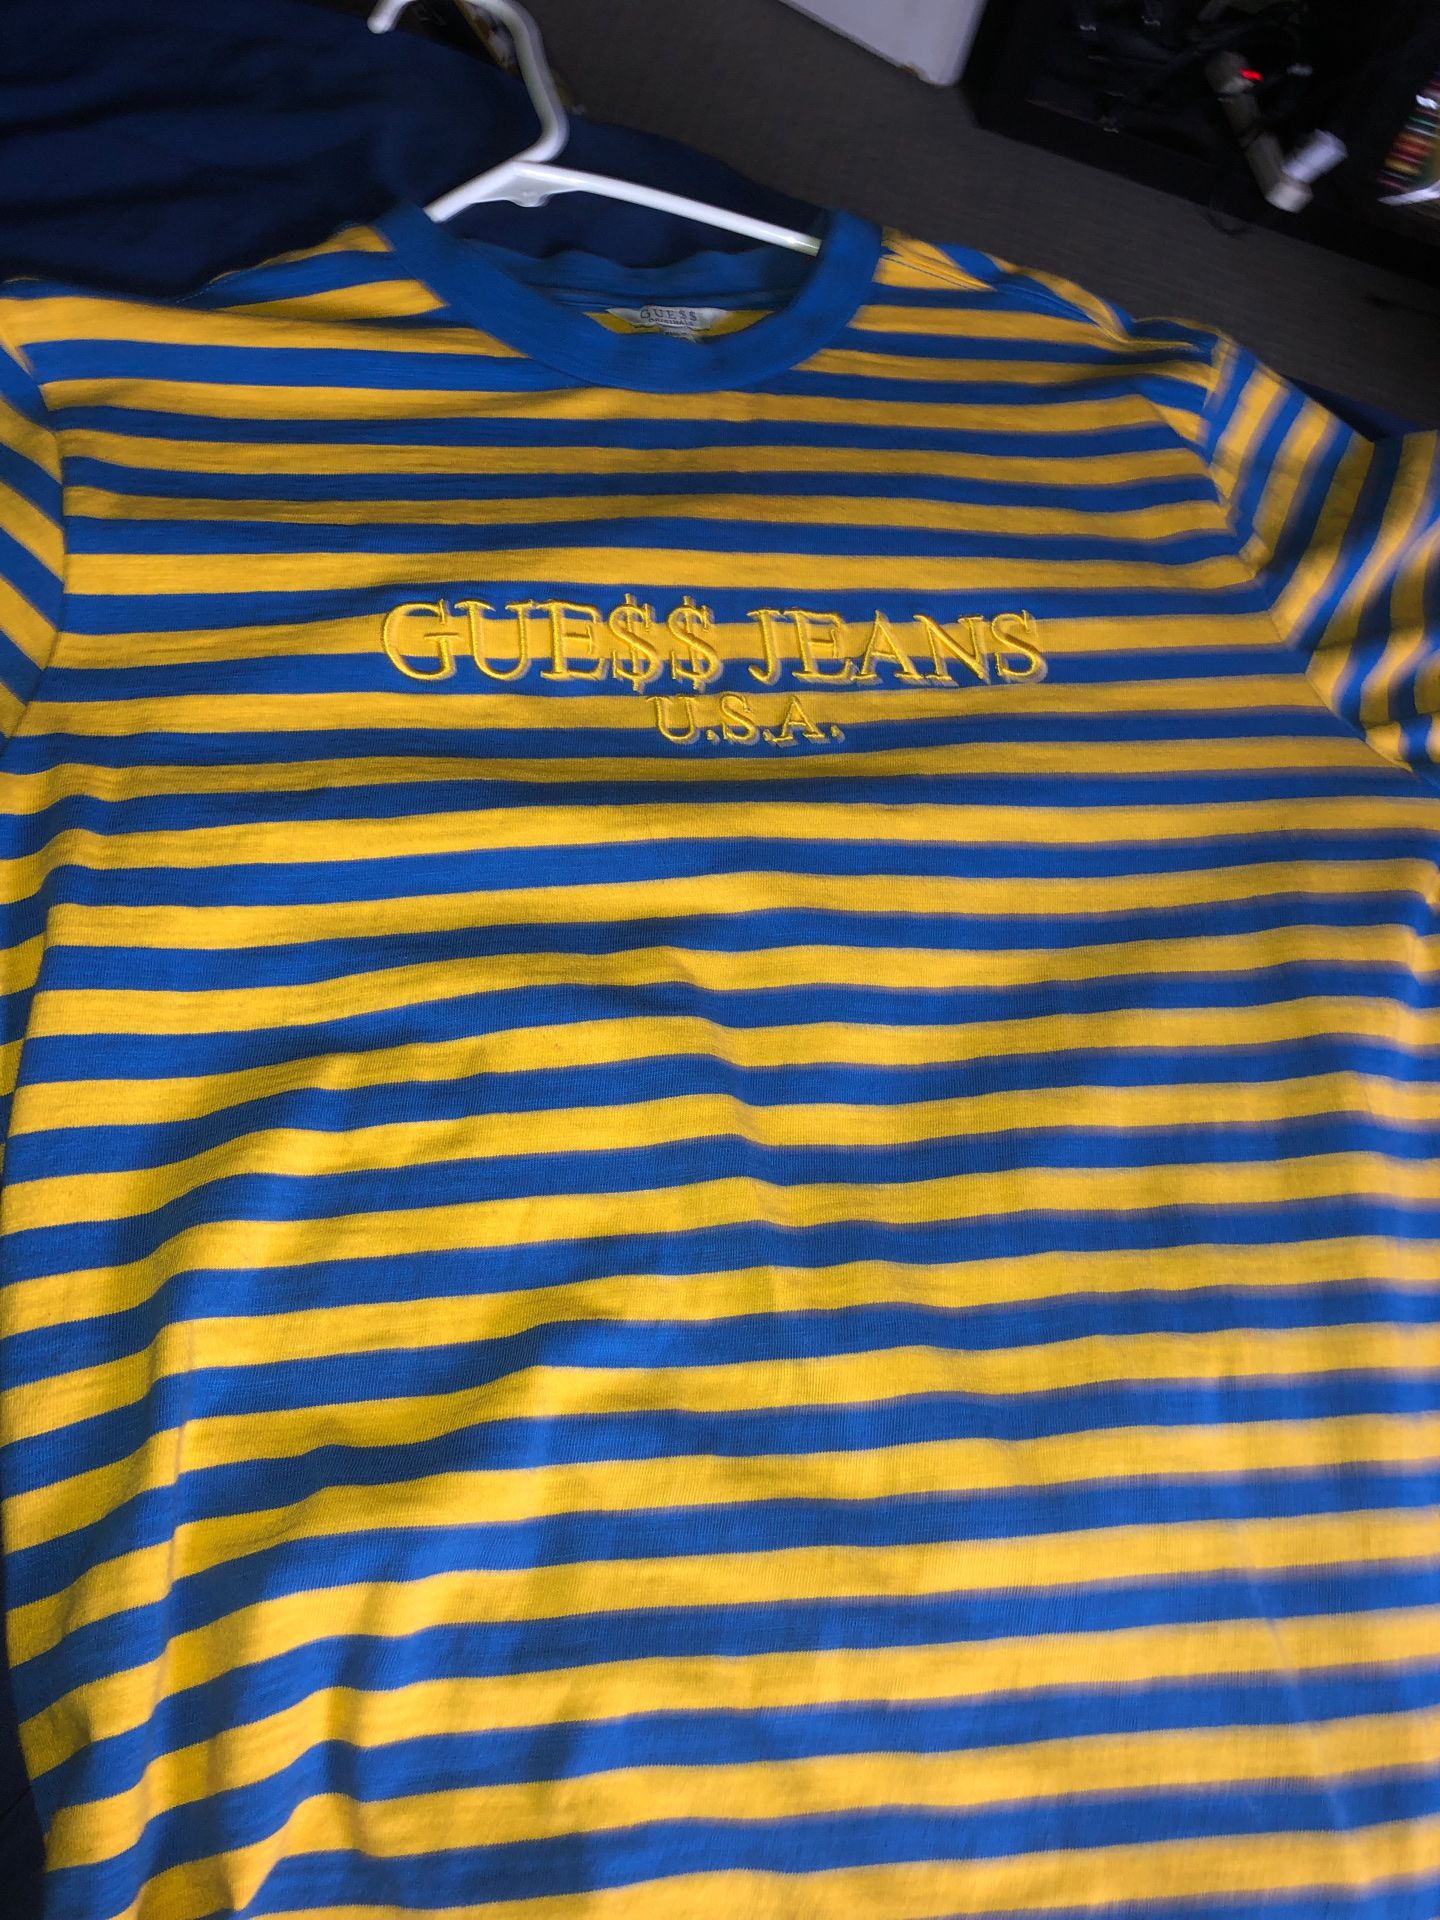 Guess Asap Rocky tee size small